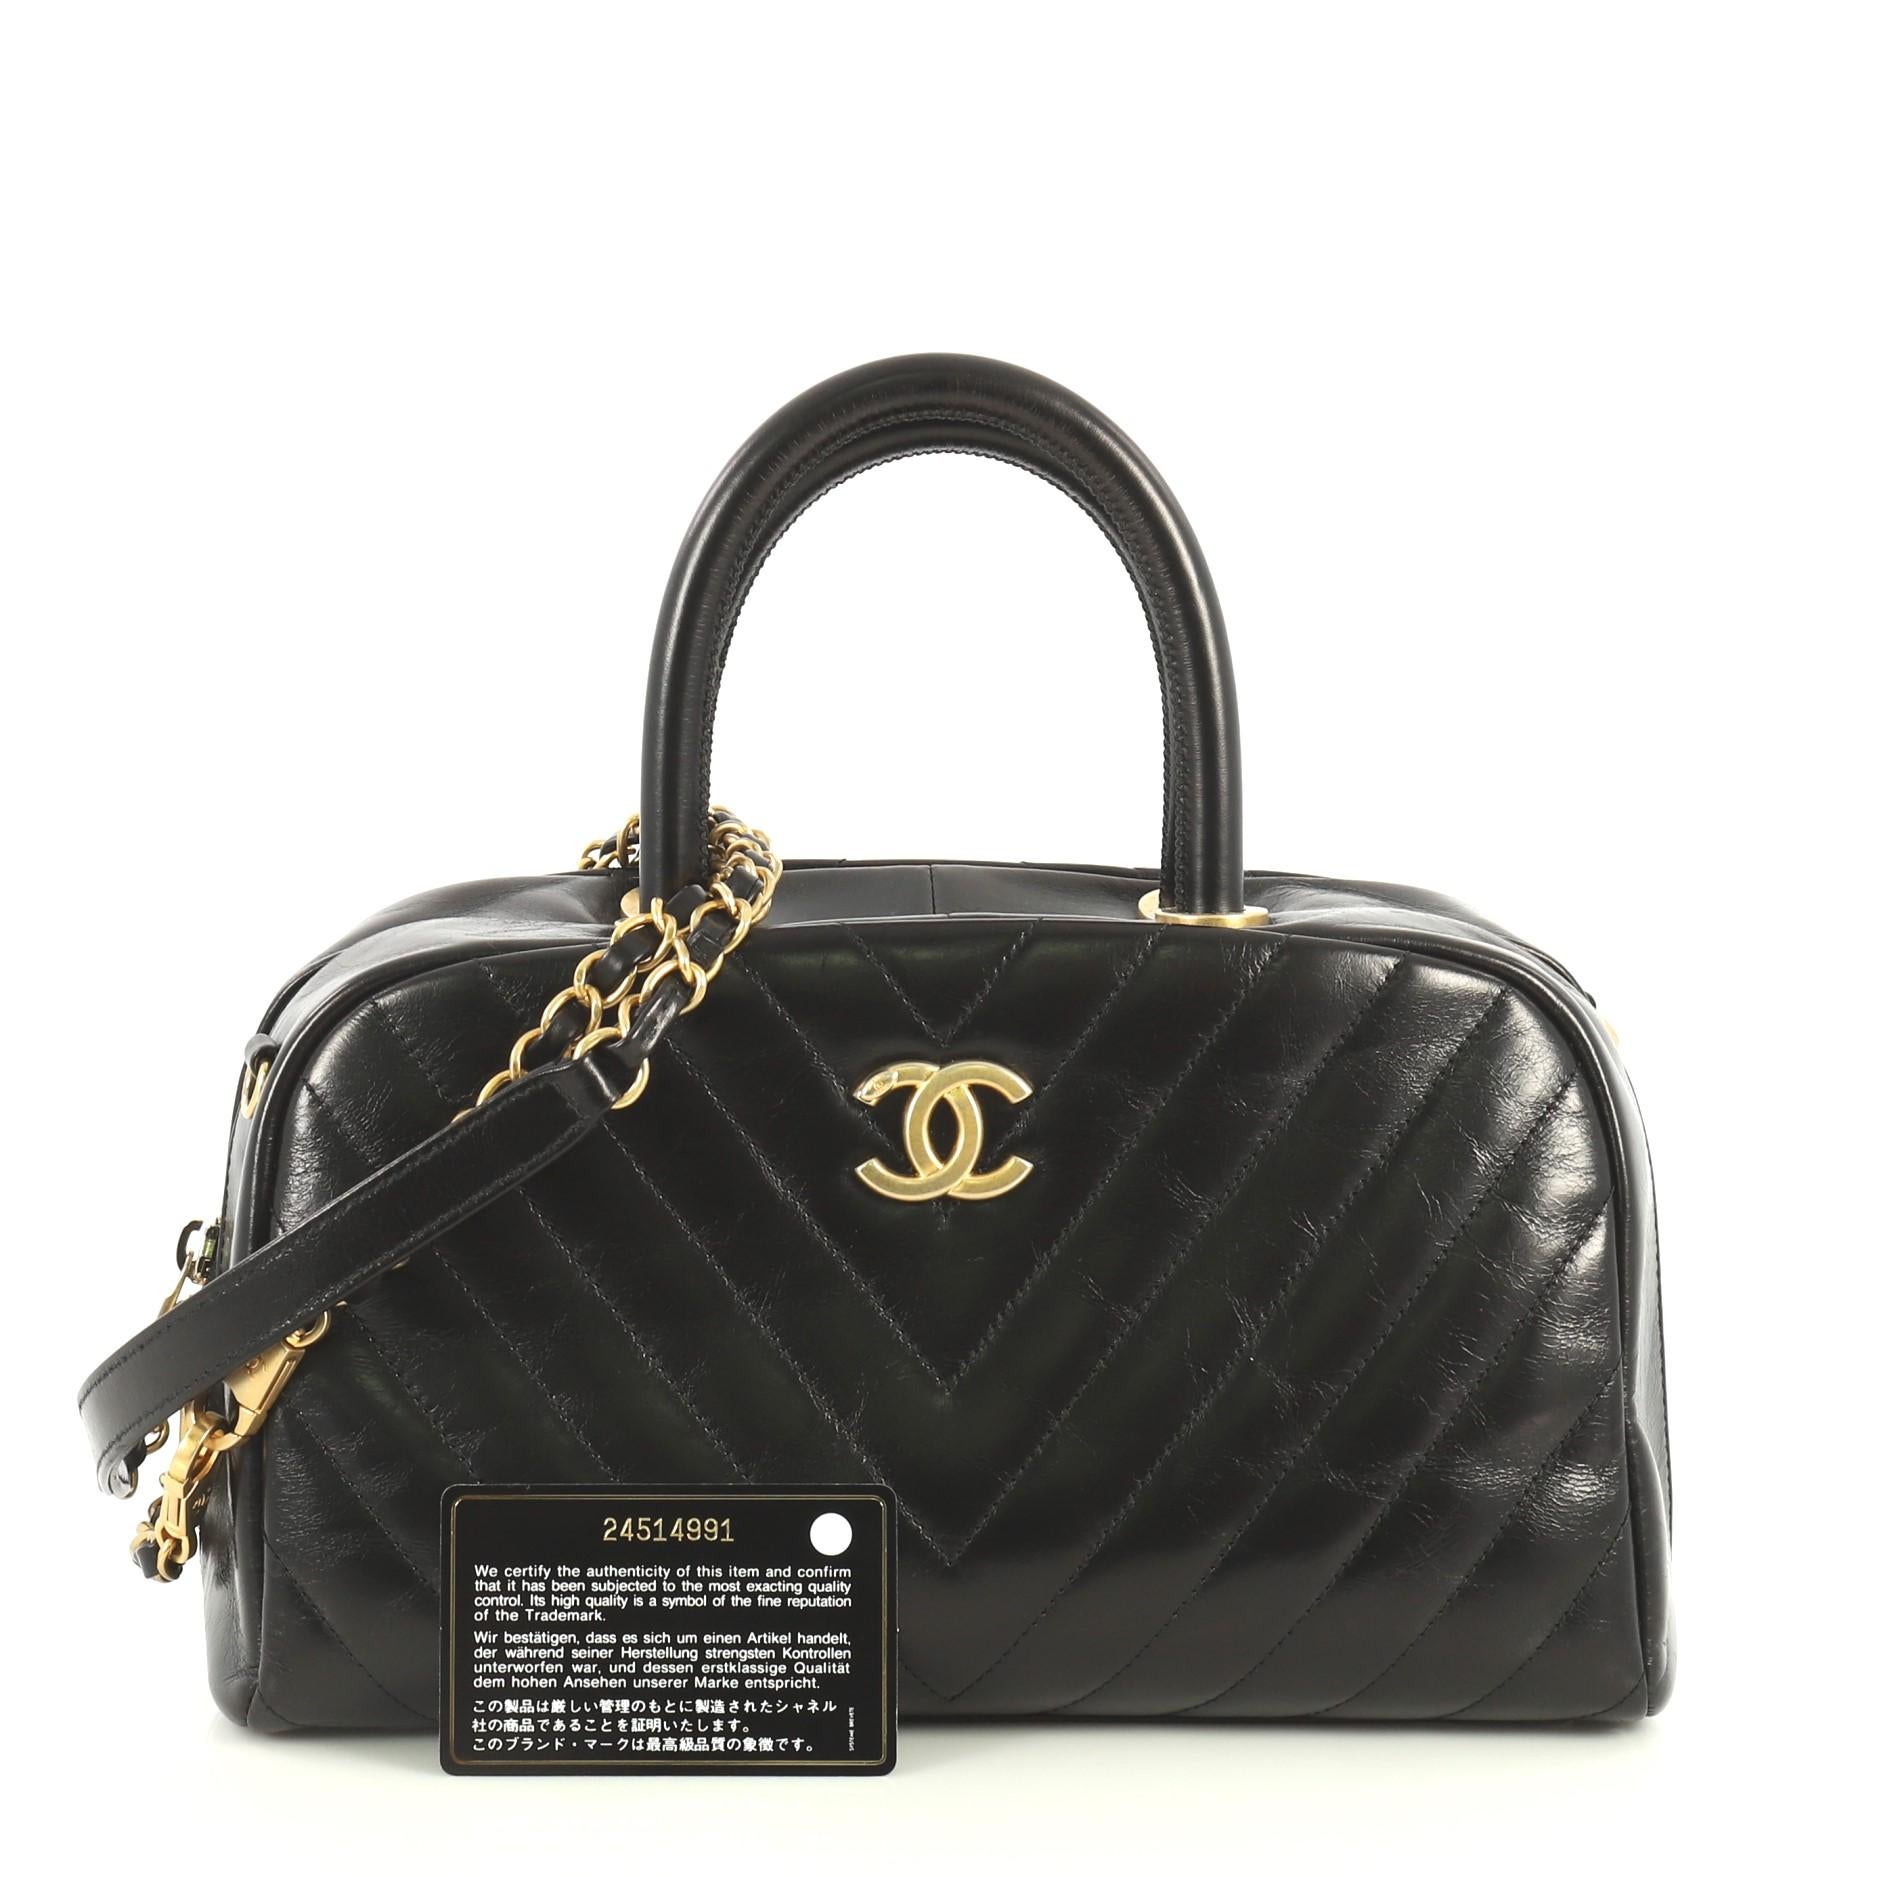 This Chanel Coco Bowling Bag Chevron Glazed Calfskin Small, crafted from black chevron glazed calfskin leather, features dual rolled handles and aged gold-tone hardware. Its zip closure opens to a red fabric interior with zip and slip pockets.